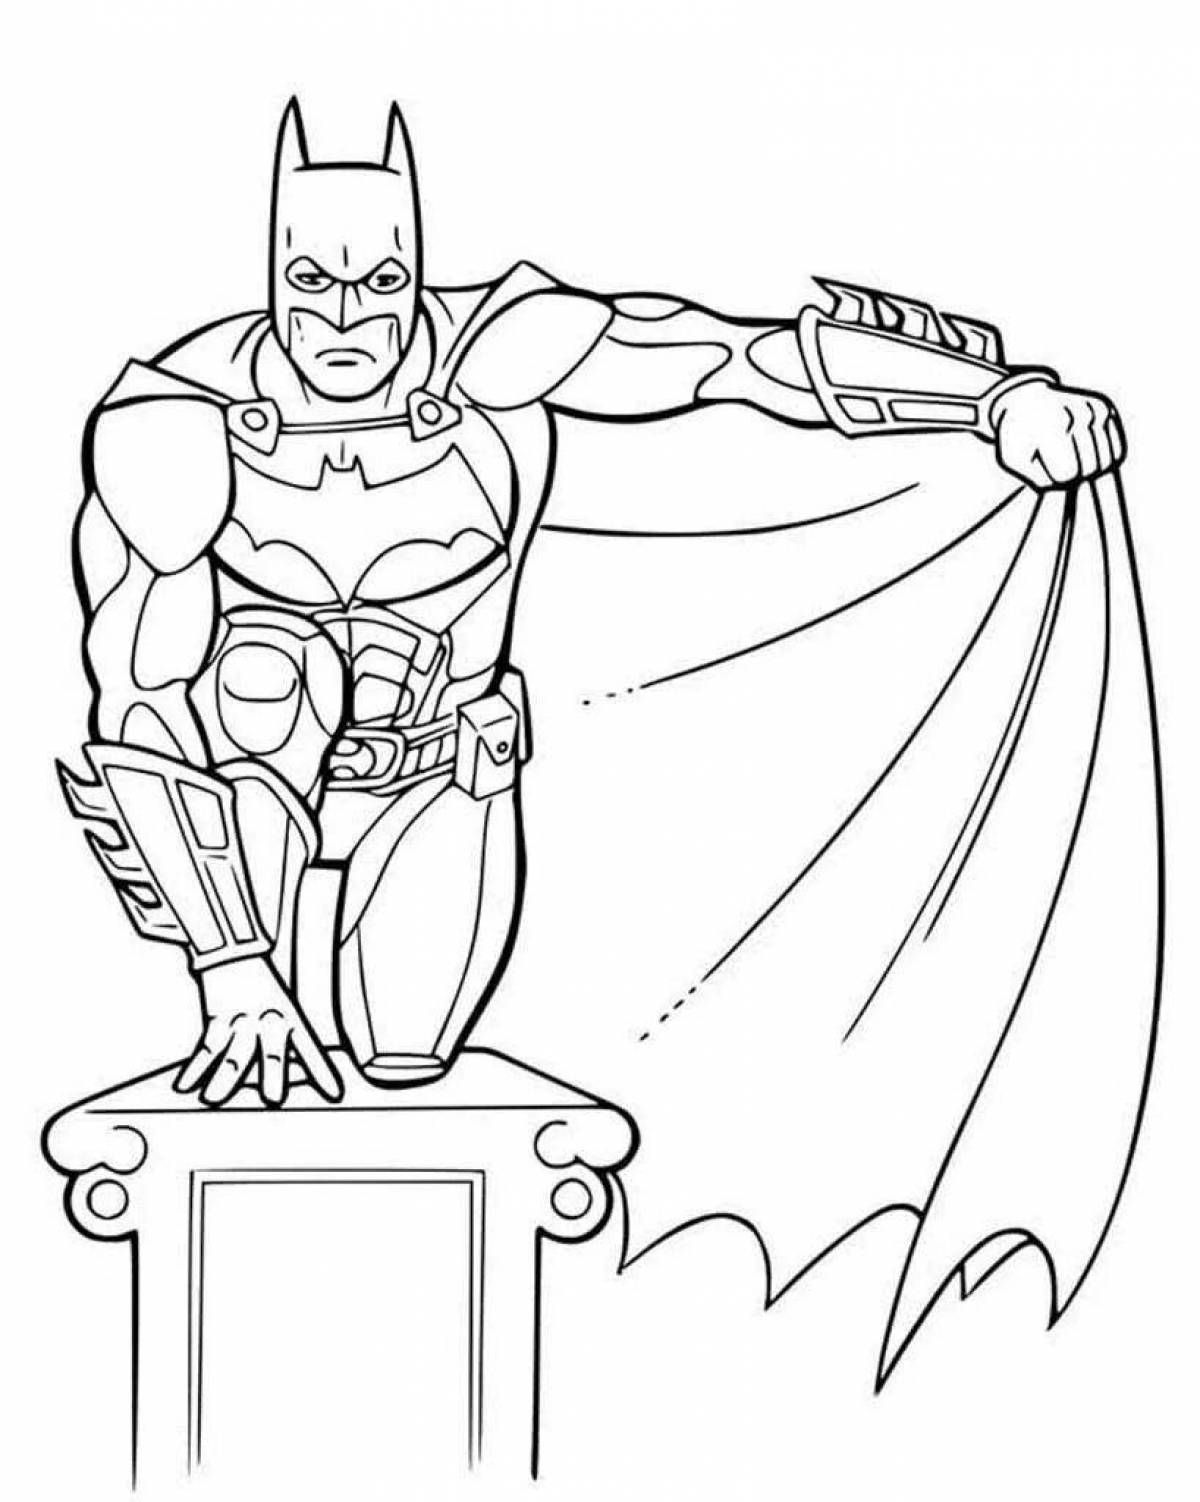 Batman coloring book for children 3-4 years old